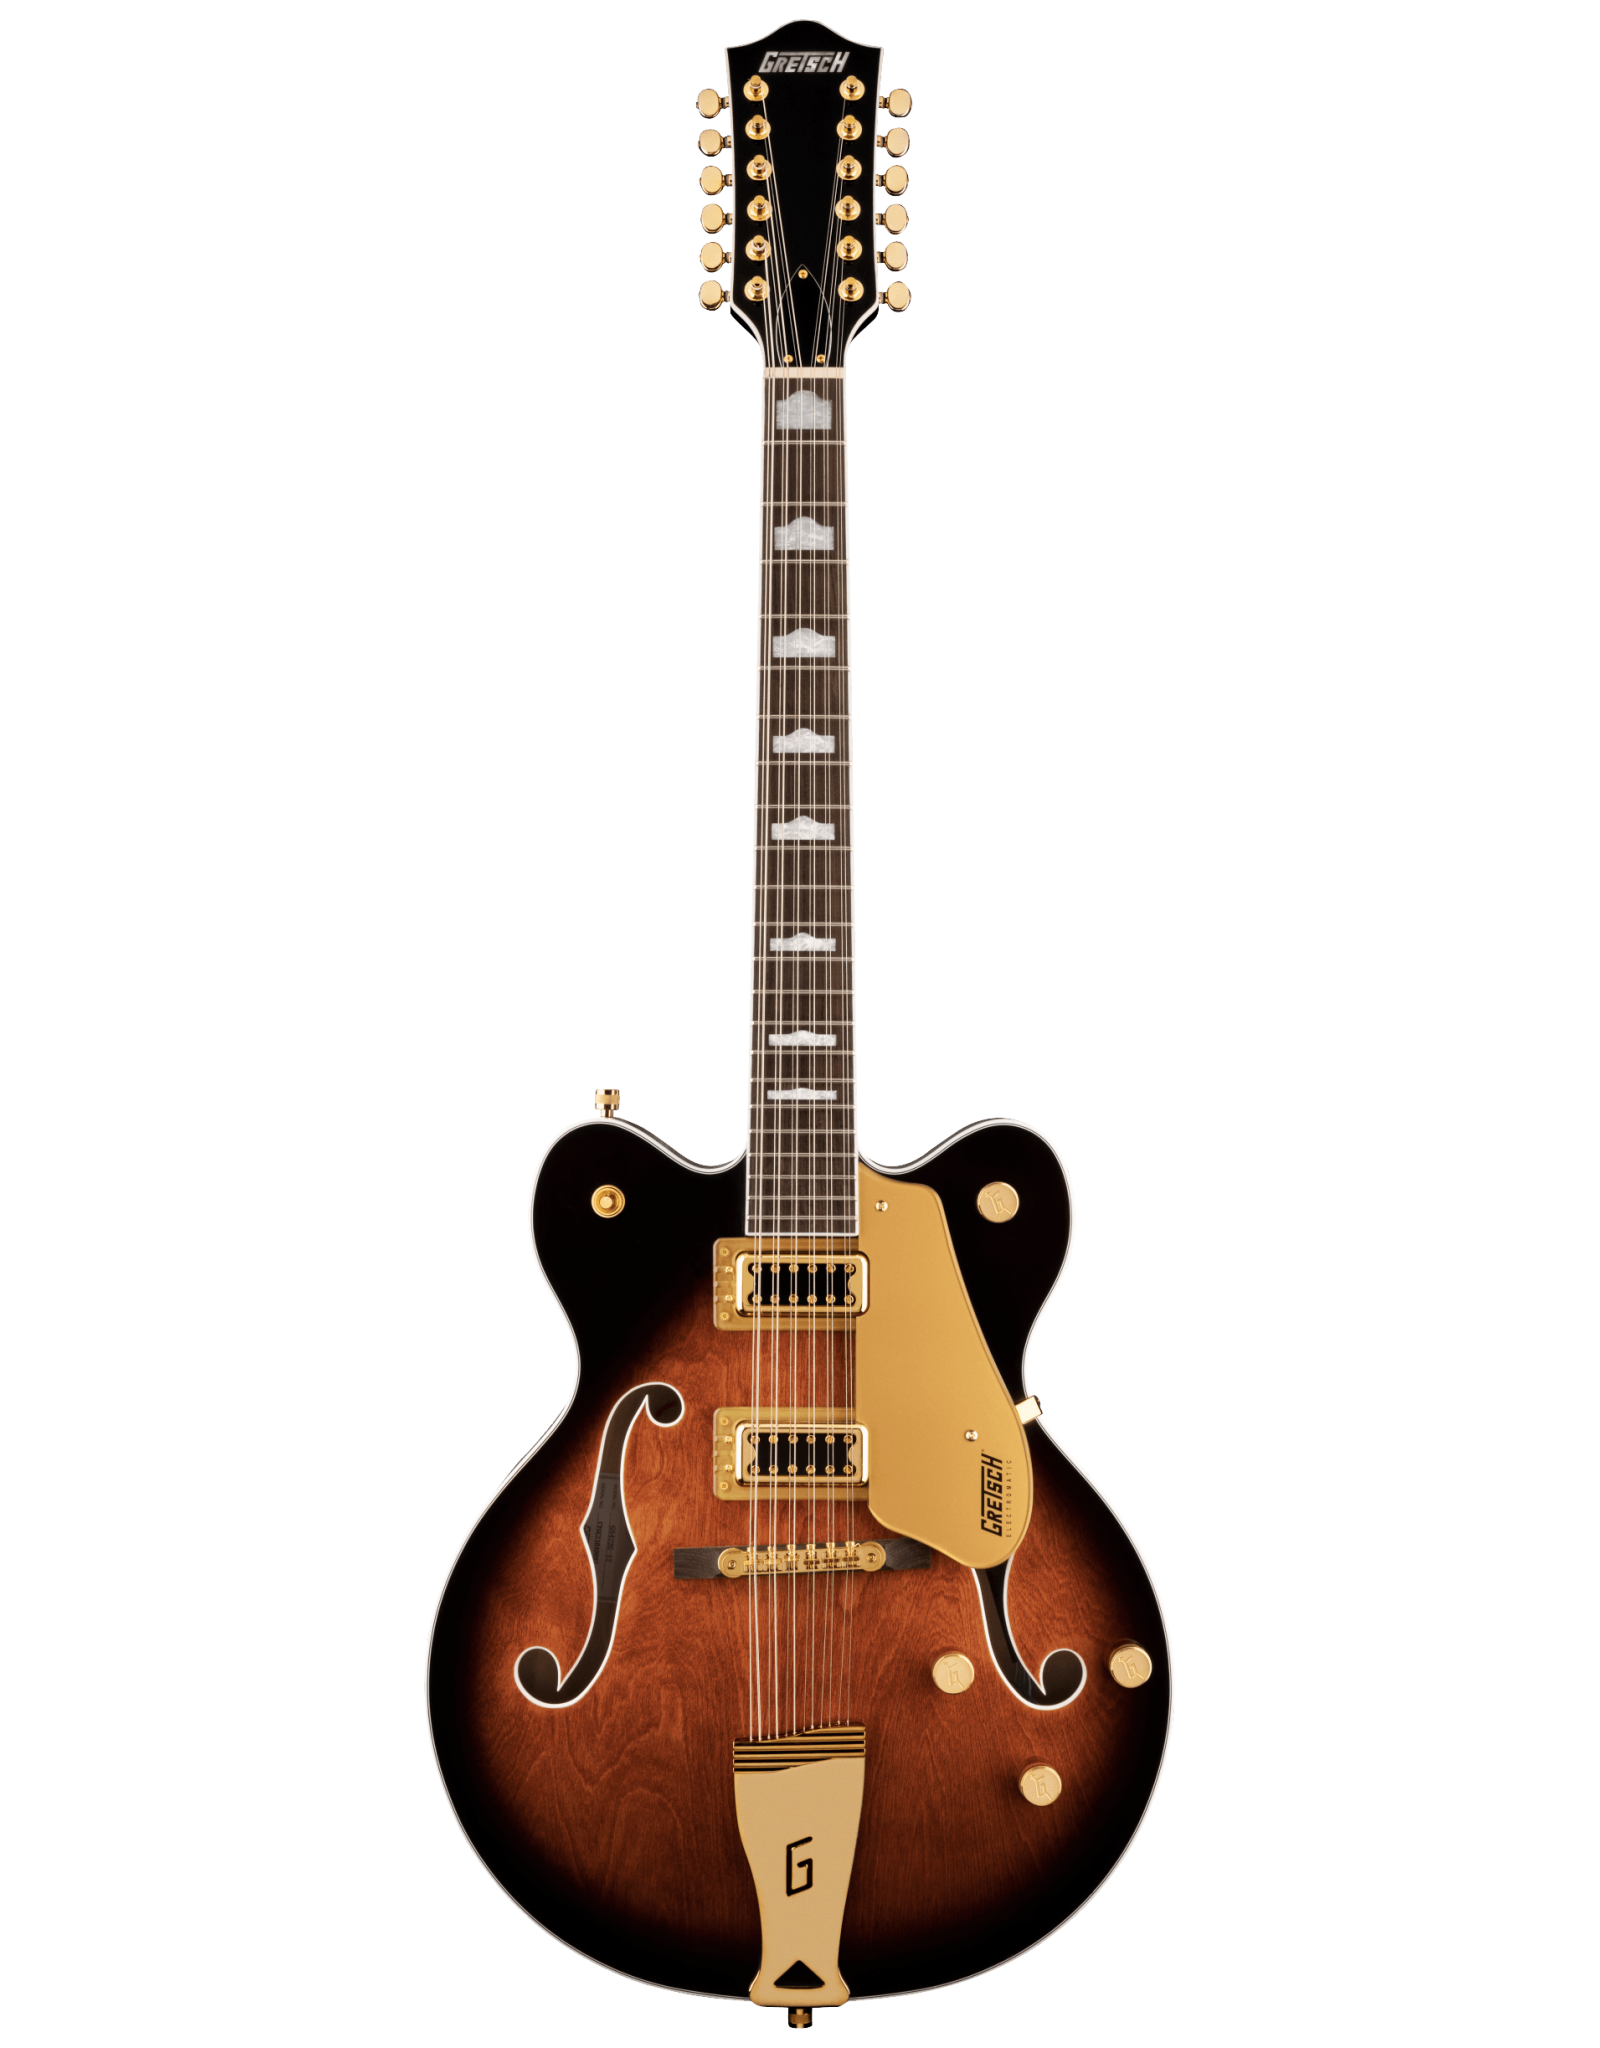 Gretsch Gretsch G5422G-12 Electromatic Classic Hollow Body Double-Cut 12-String with Gold Hardware, Single Barrel Burst